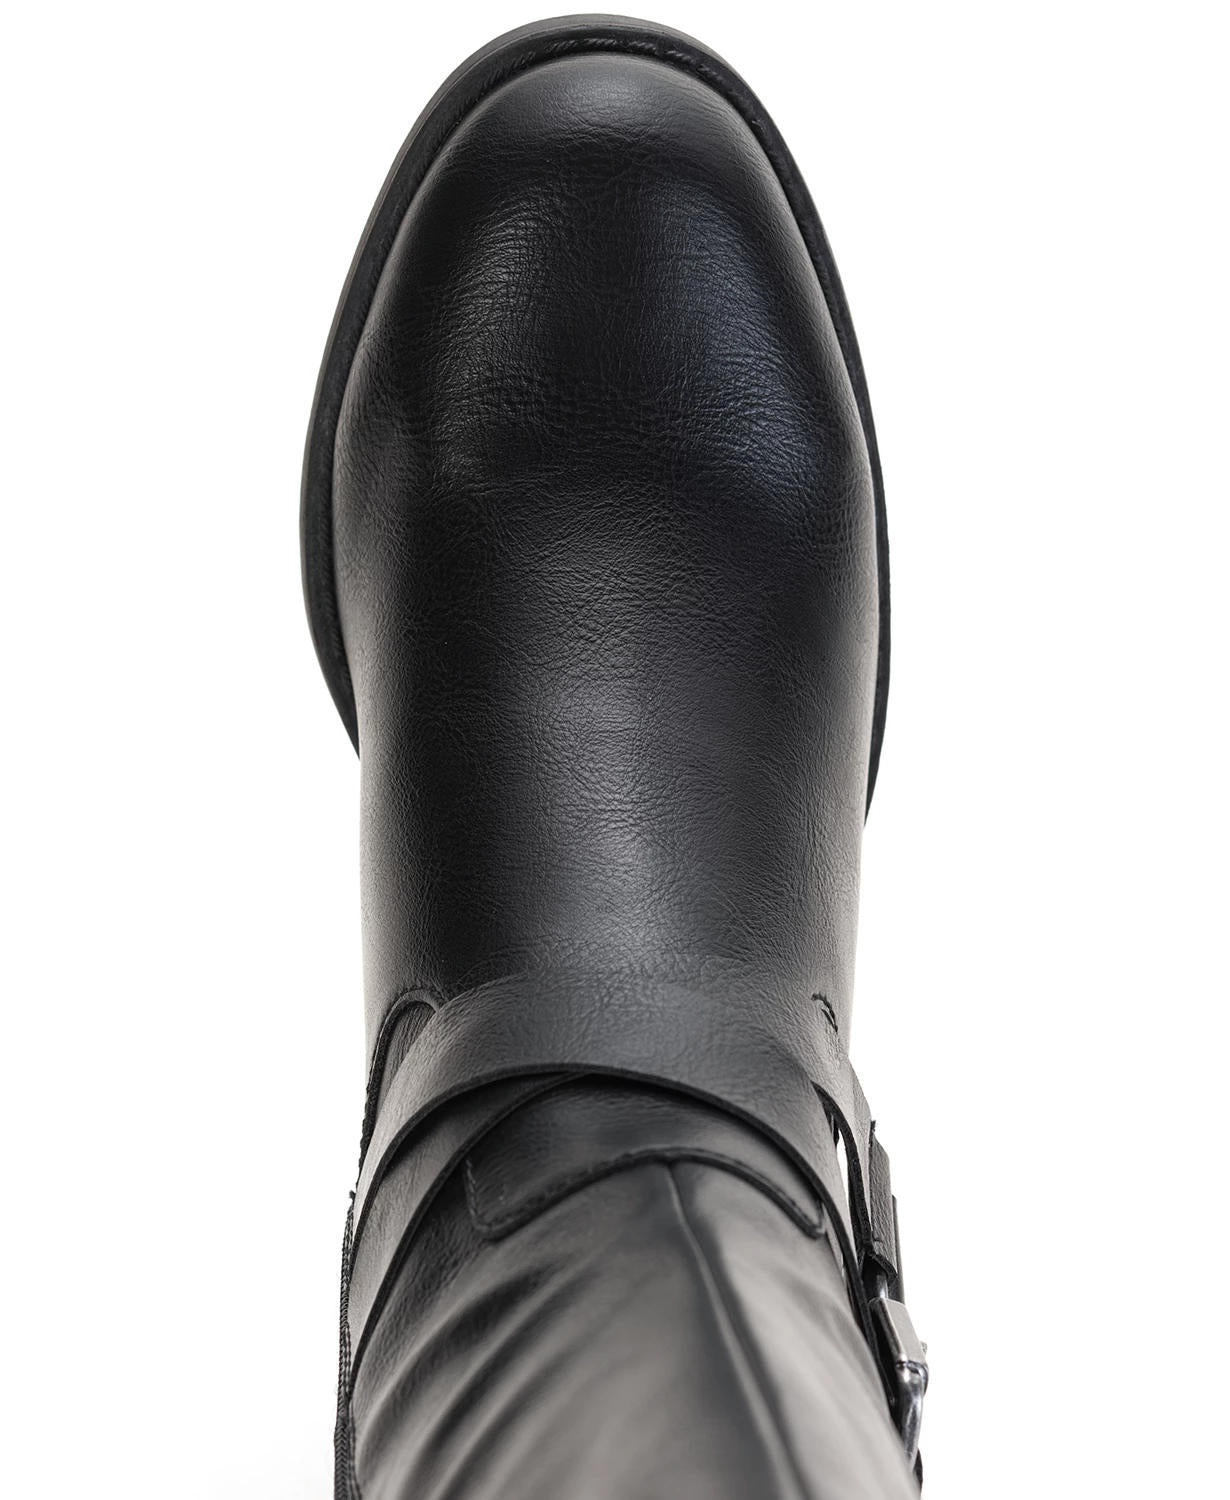 Style & Co Womens Marliee Riding Boots